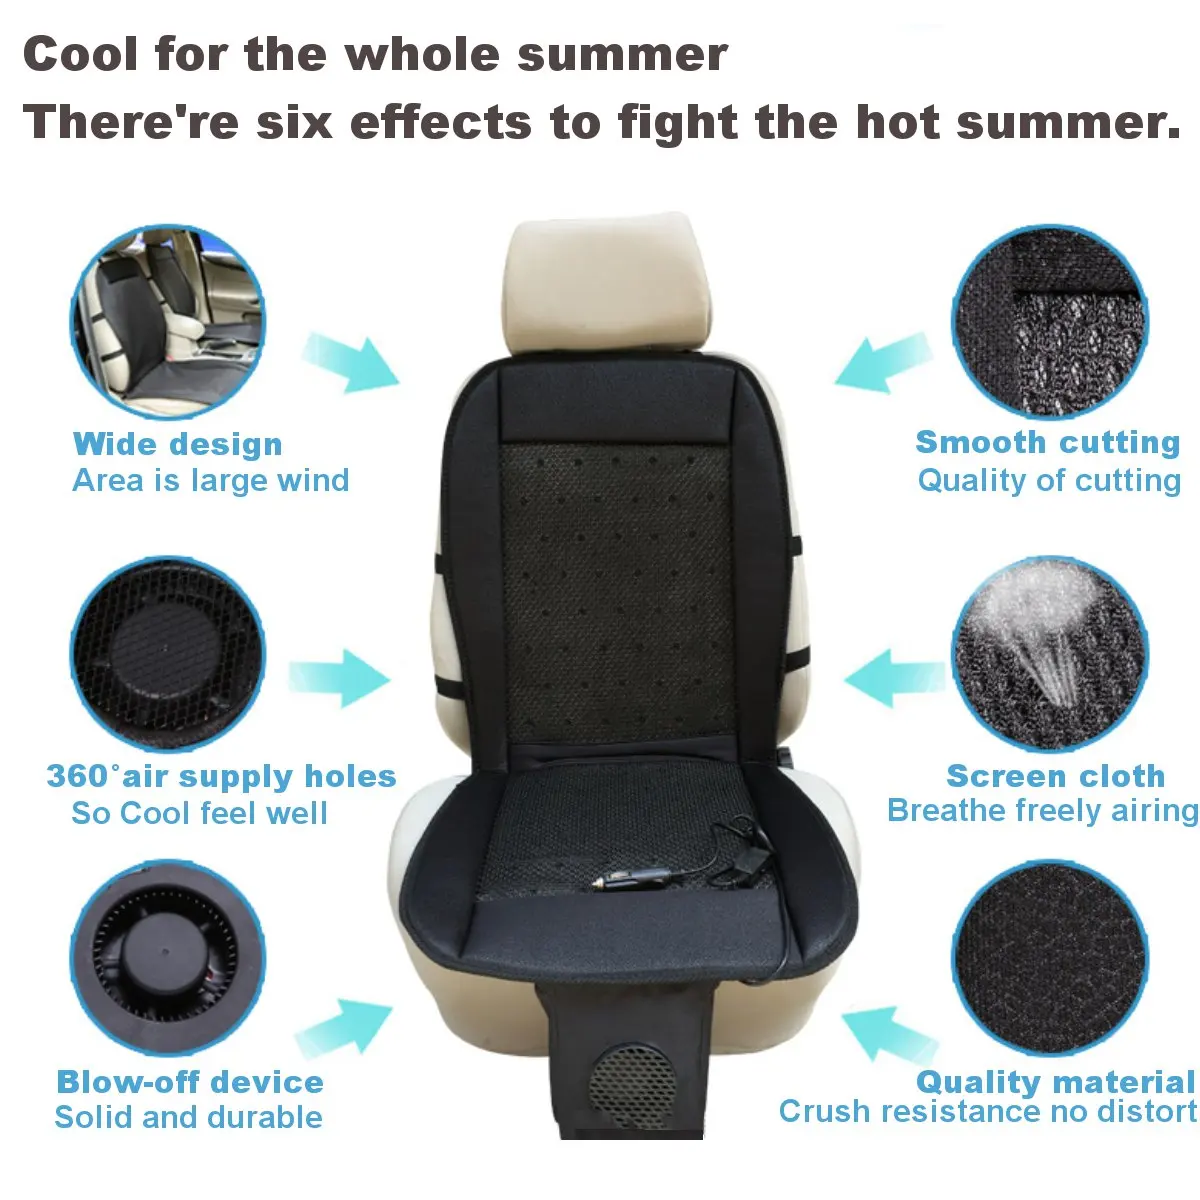 12v new summer cool ventilation cushion car cushion cooling seat air fan massage seat air conditioning cushion 2 speeds lowhigh free global shipping